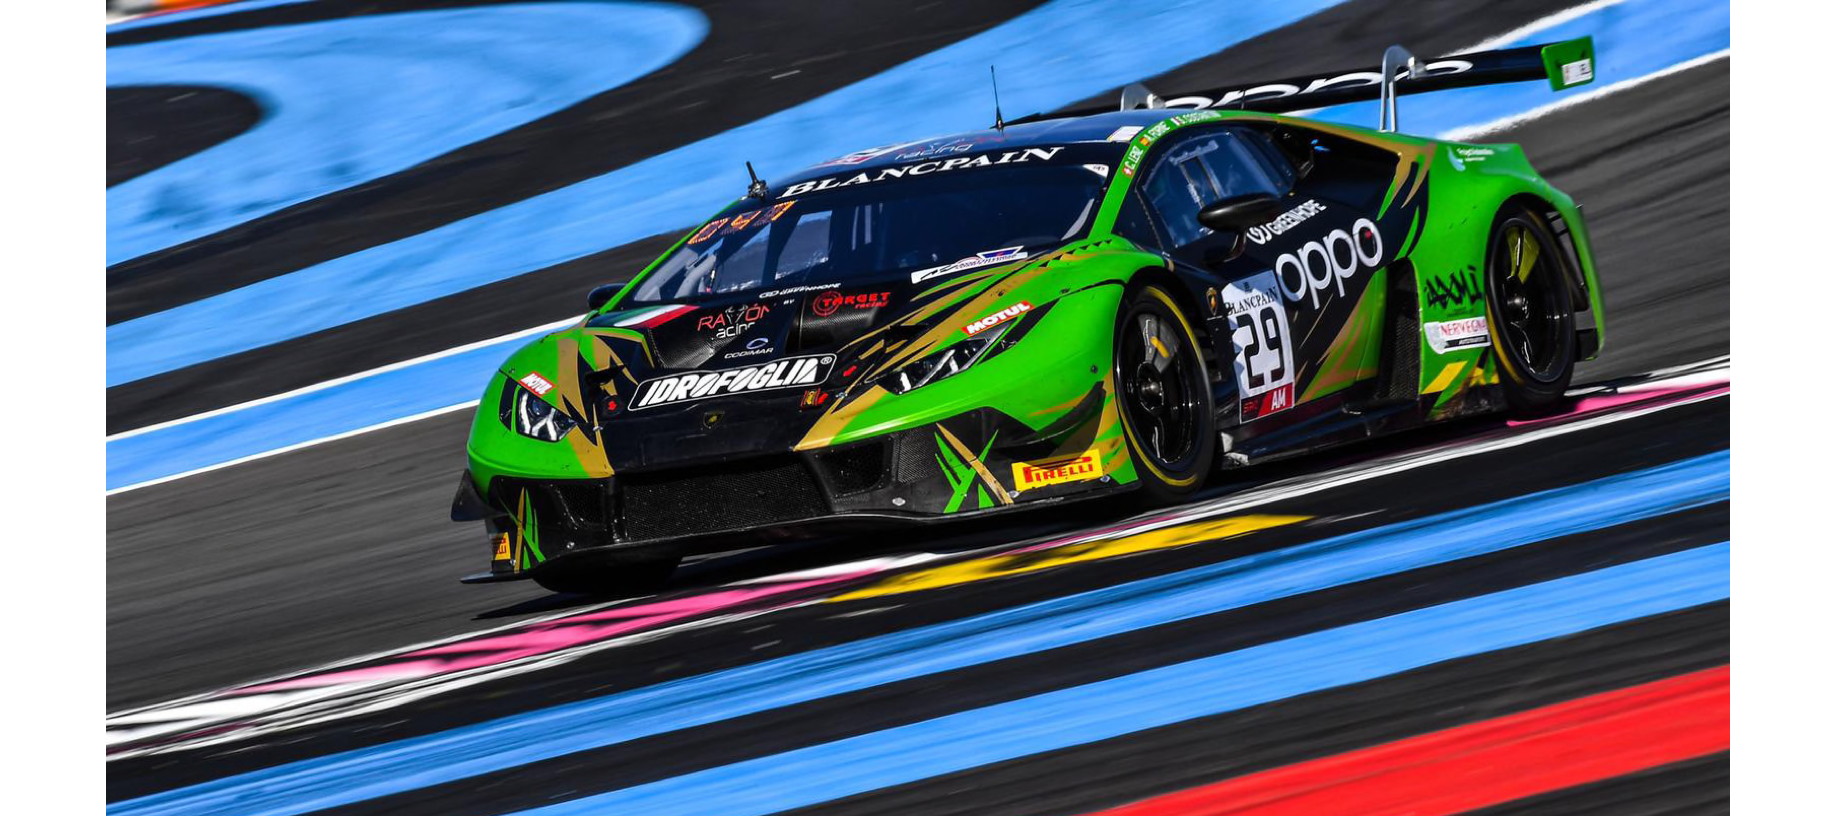 1000 KM Paul Ricard - Tough weekend for Raton by Target despite strong pace